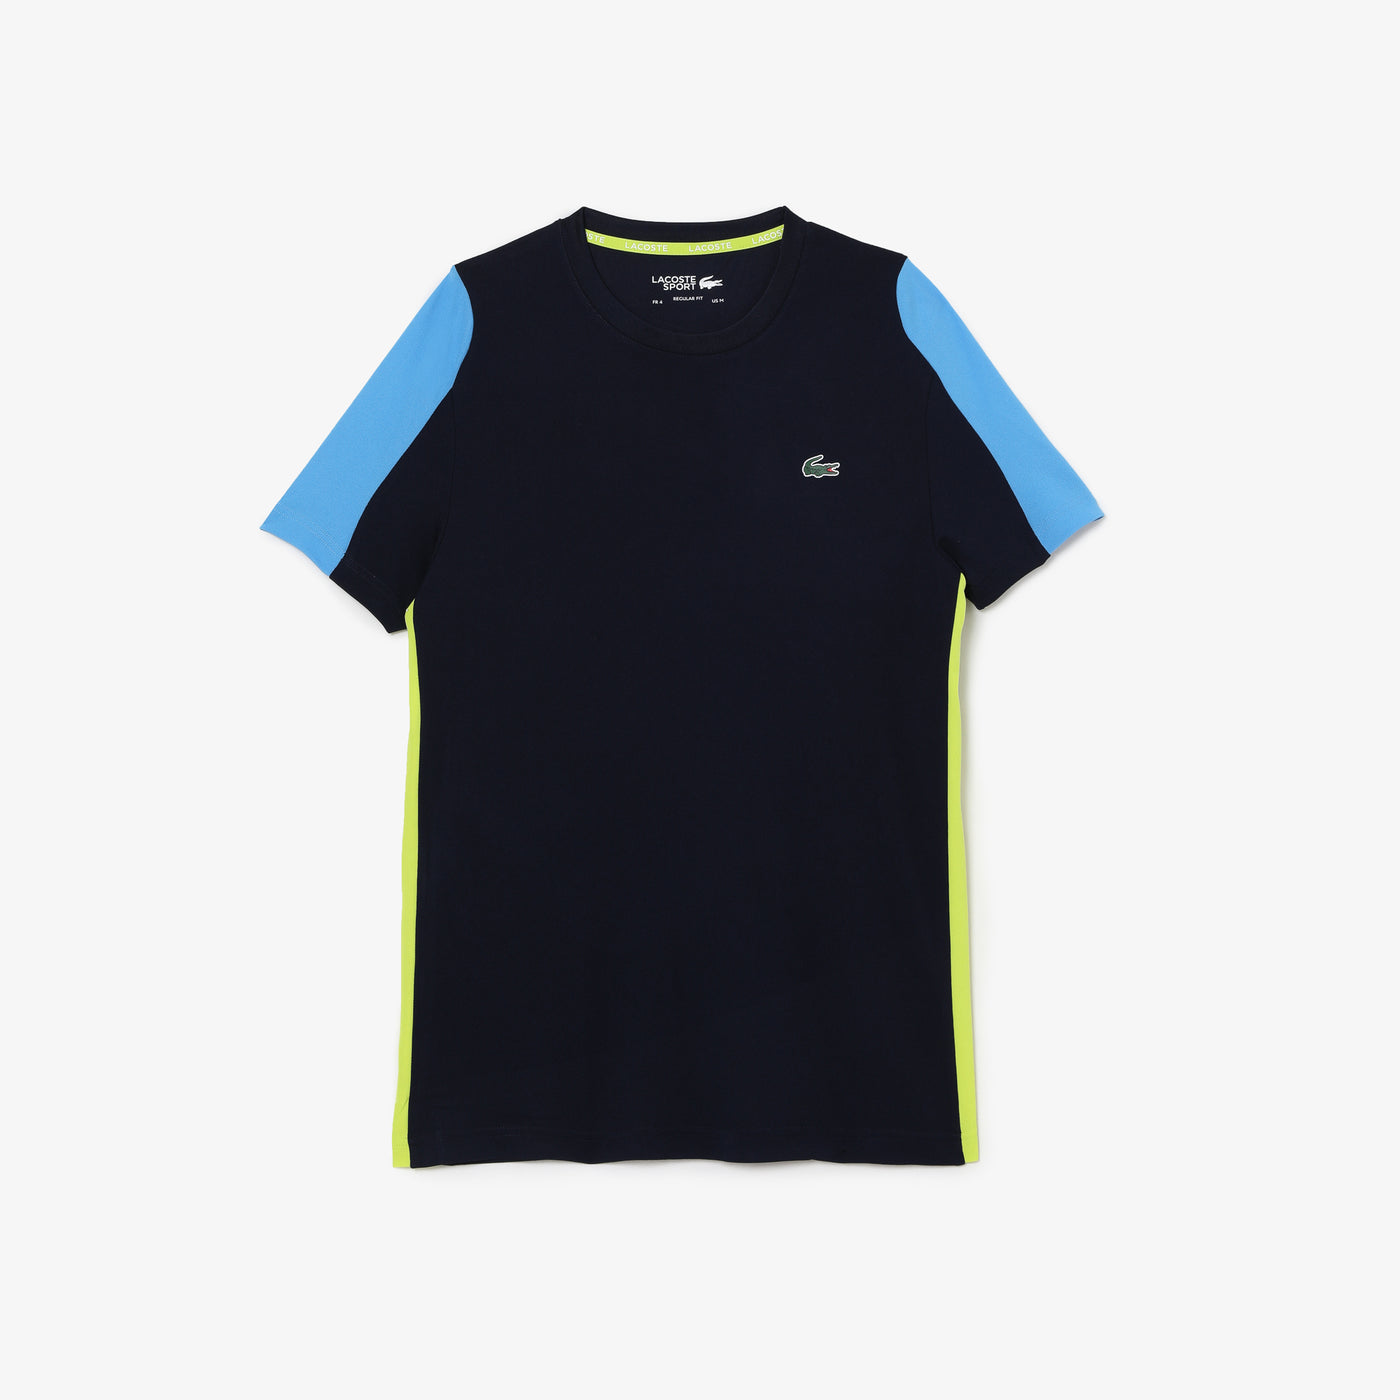 Shop The Latest Collection Of Outlet - Lacoste Men'S Lacoste Sport Crocodile Print Tennis T-Shirt - Th9417 In Lebanon